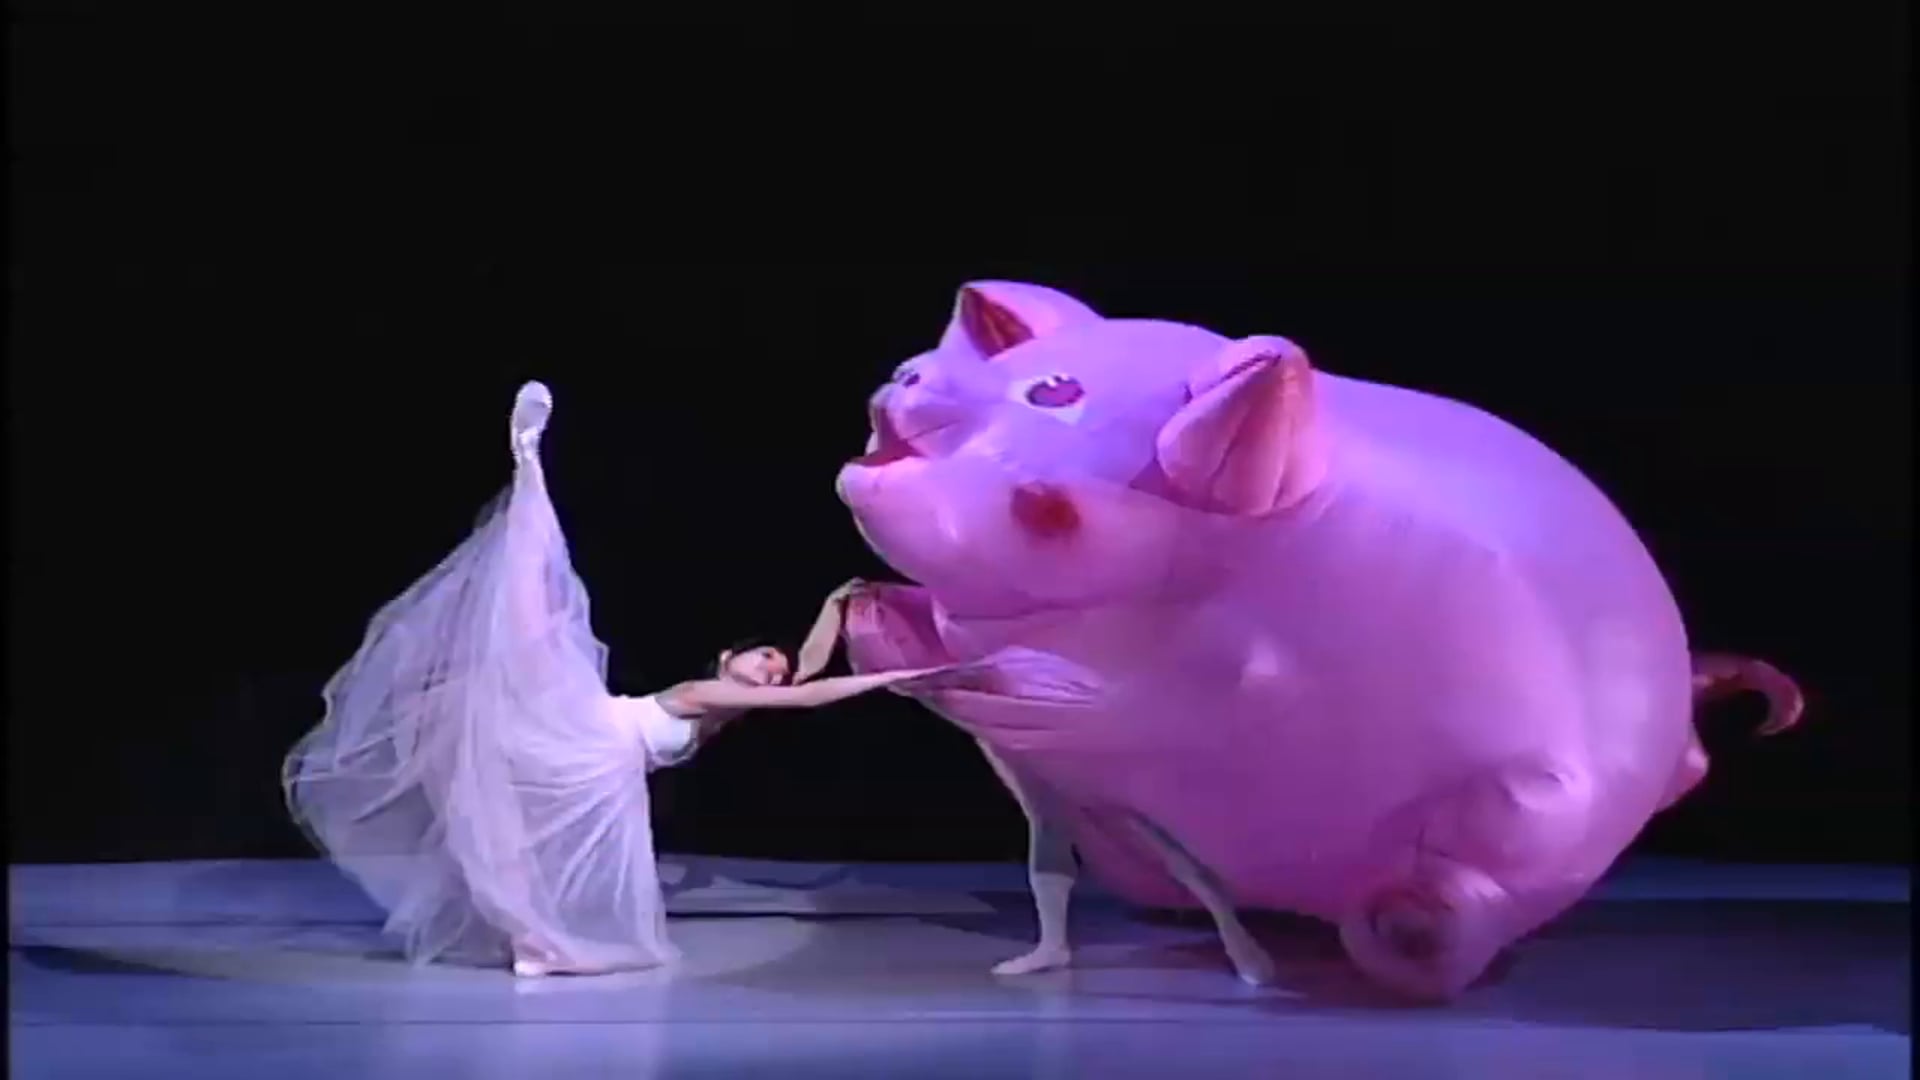 The Pig (2007)